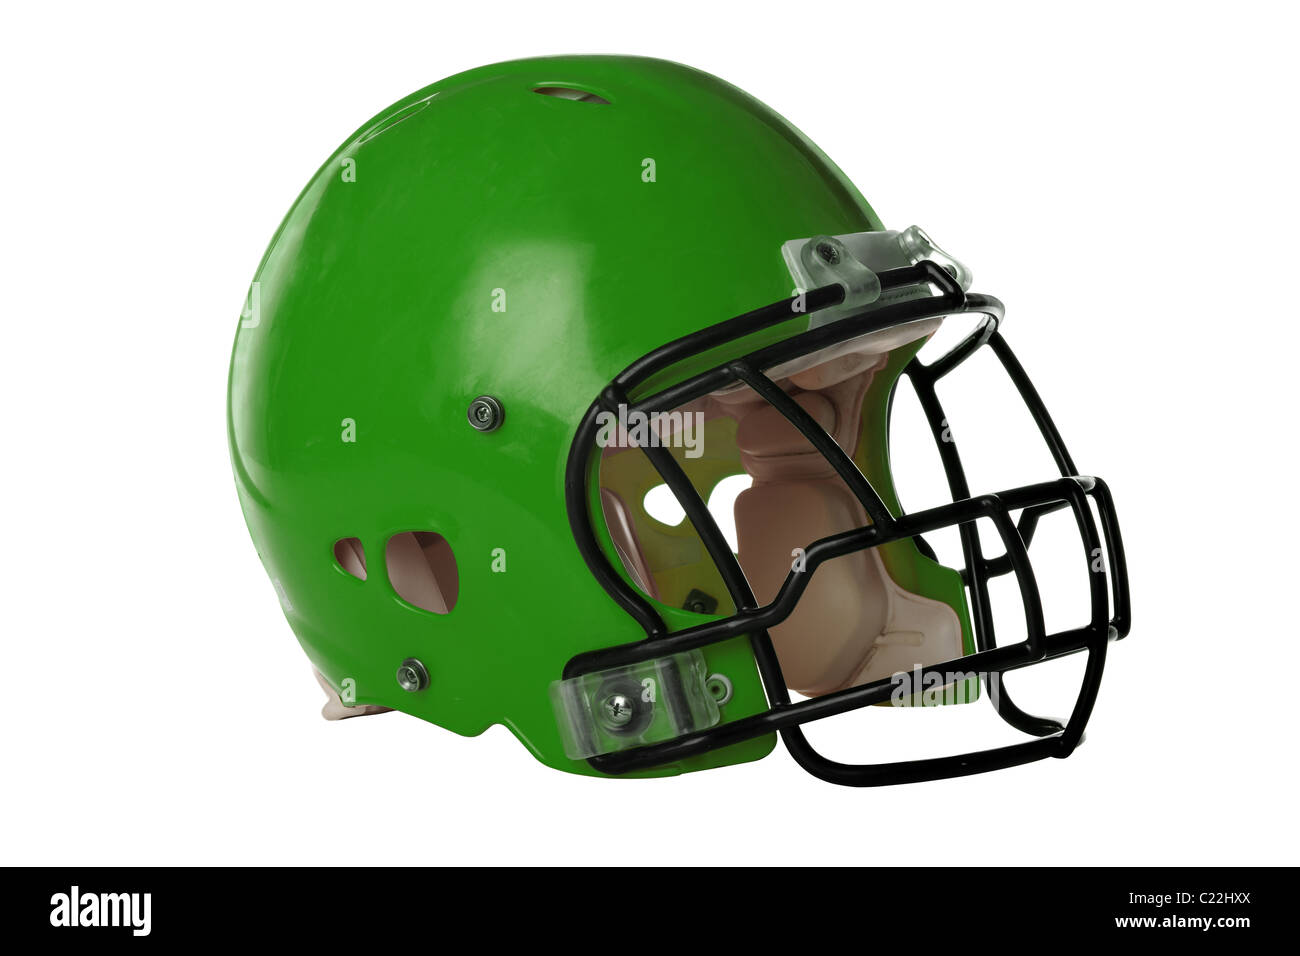 Football helmet vert isolé sur fond blanc - With Clipping Path Banque D'Images